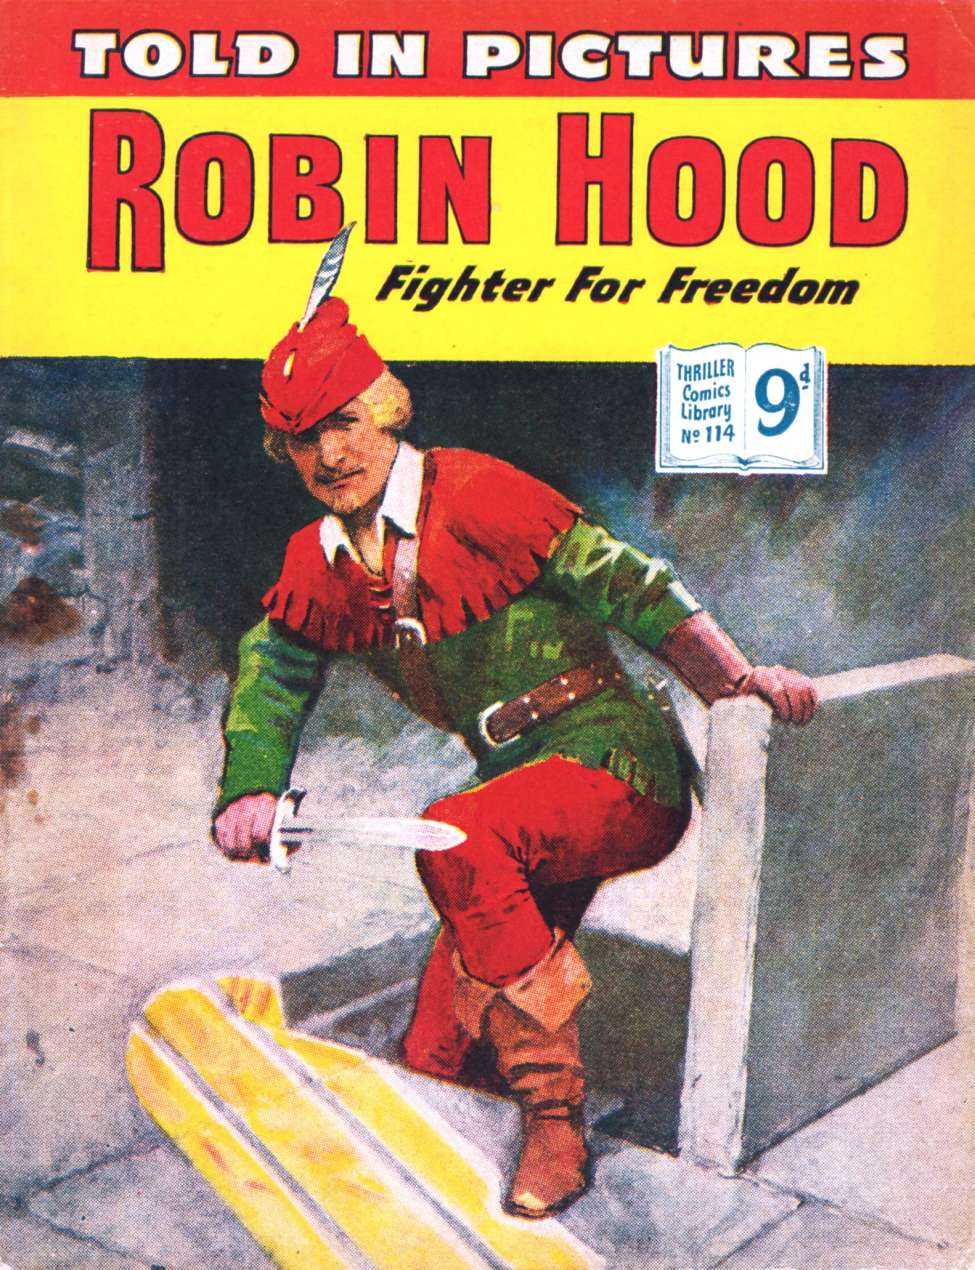 Book Cover For Thriller Comics Library 114 - Robin Hood Fighter For Freedom